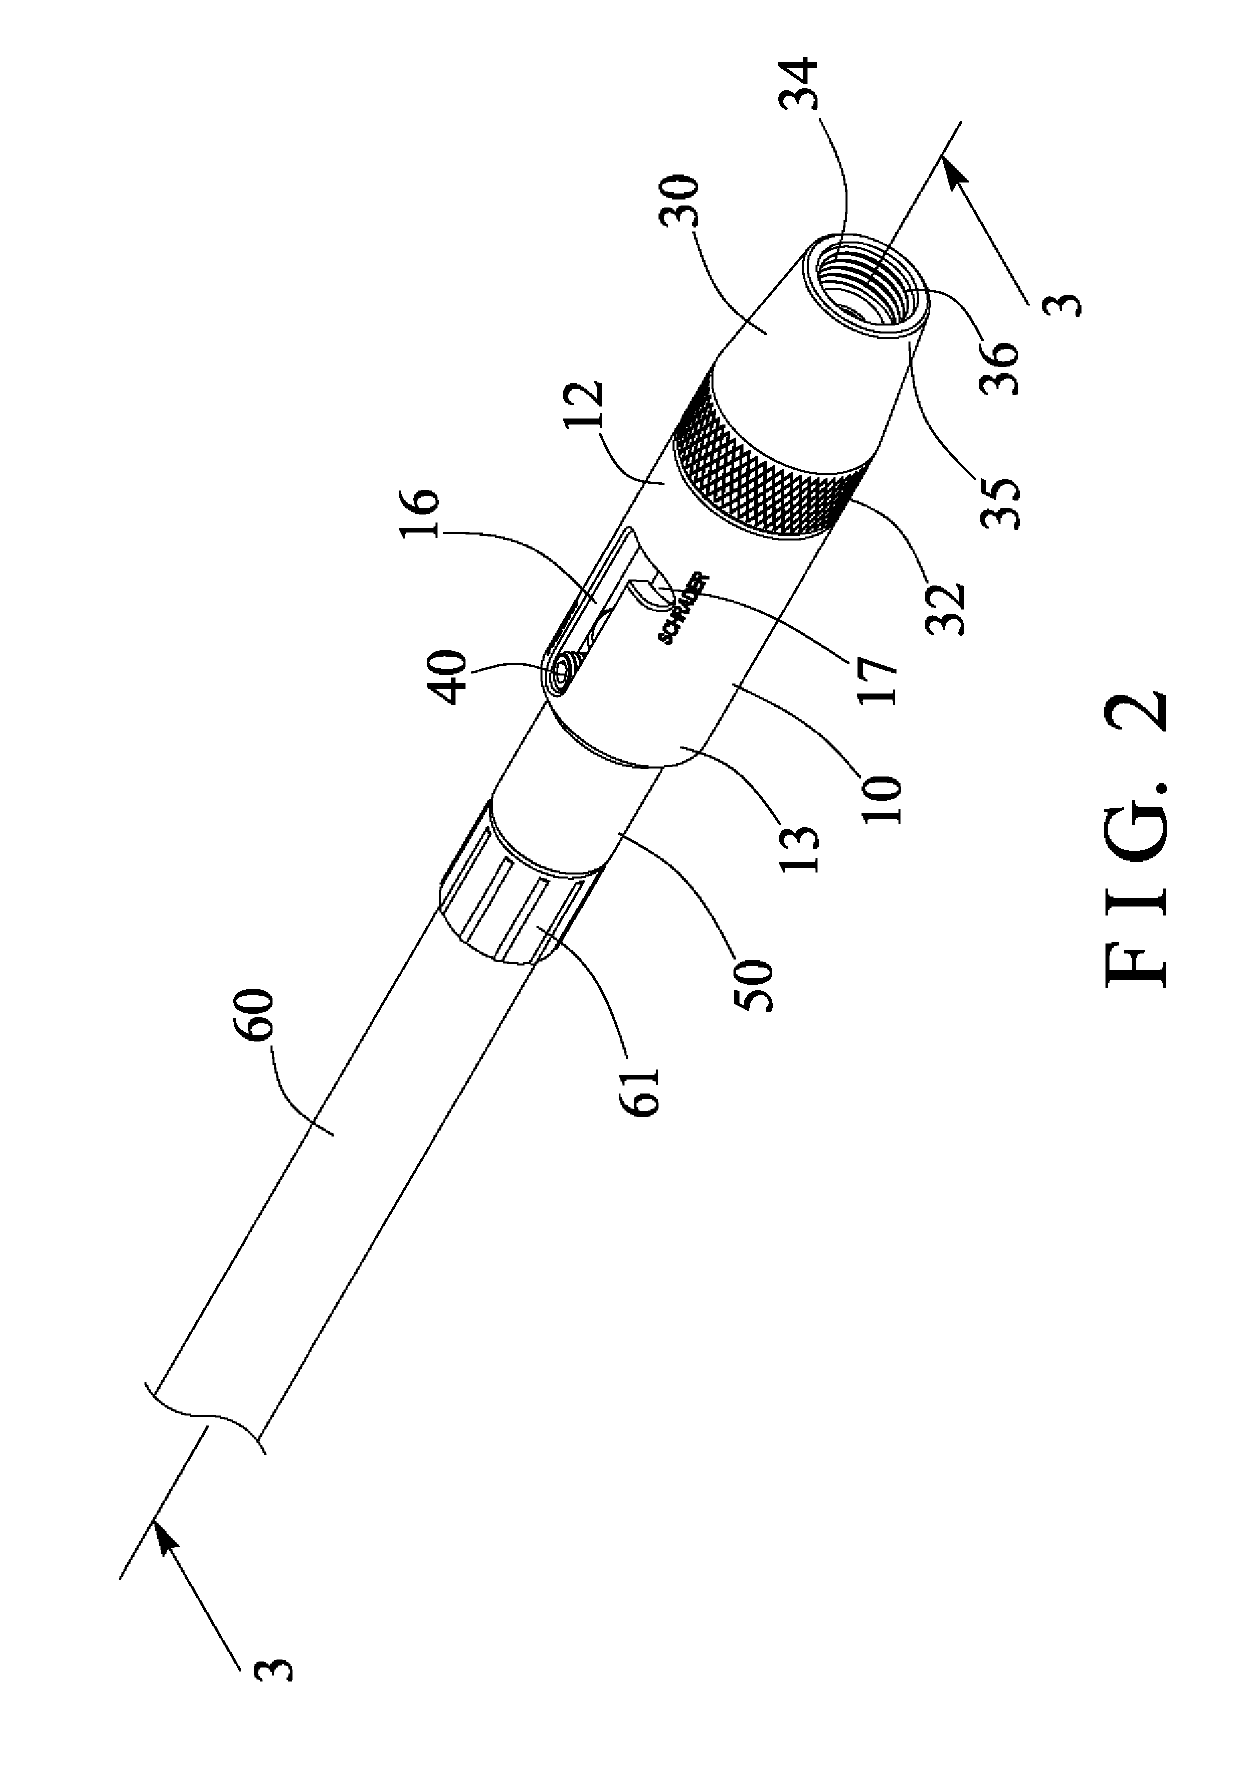 Air valve connecting device for different inflation valves